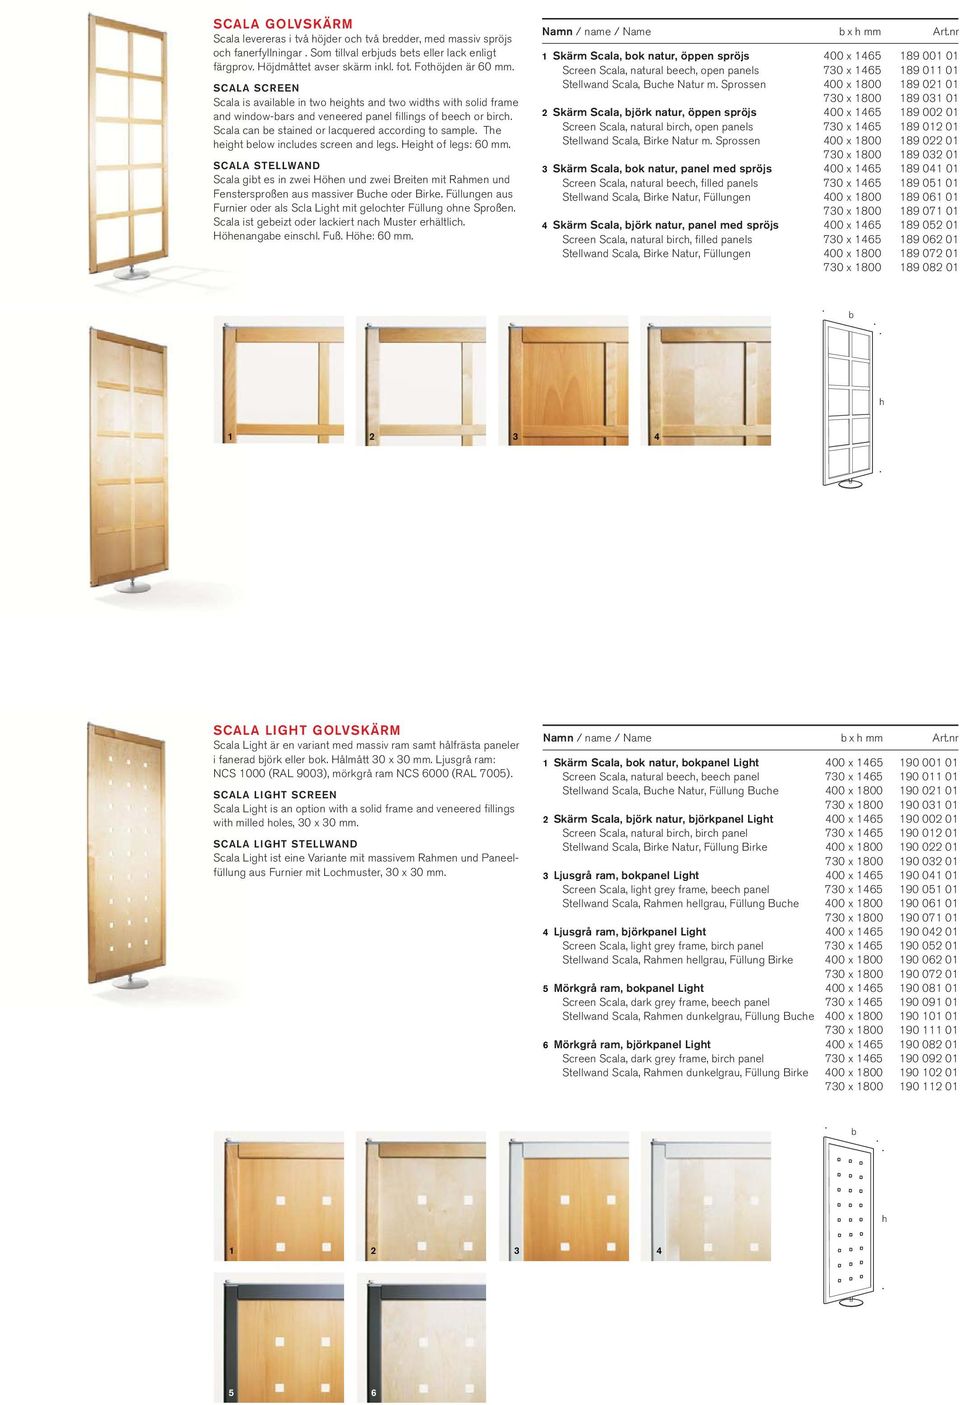 Scala can be stained or lacquered according to sample. The height below includes screen and legs. Height of legs: 60 mm.